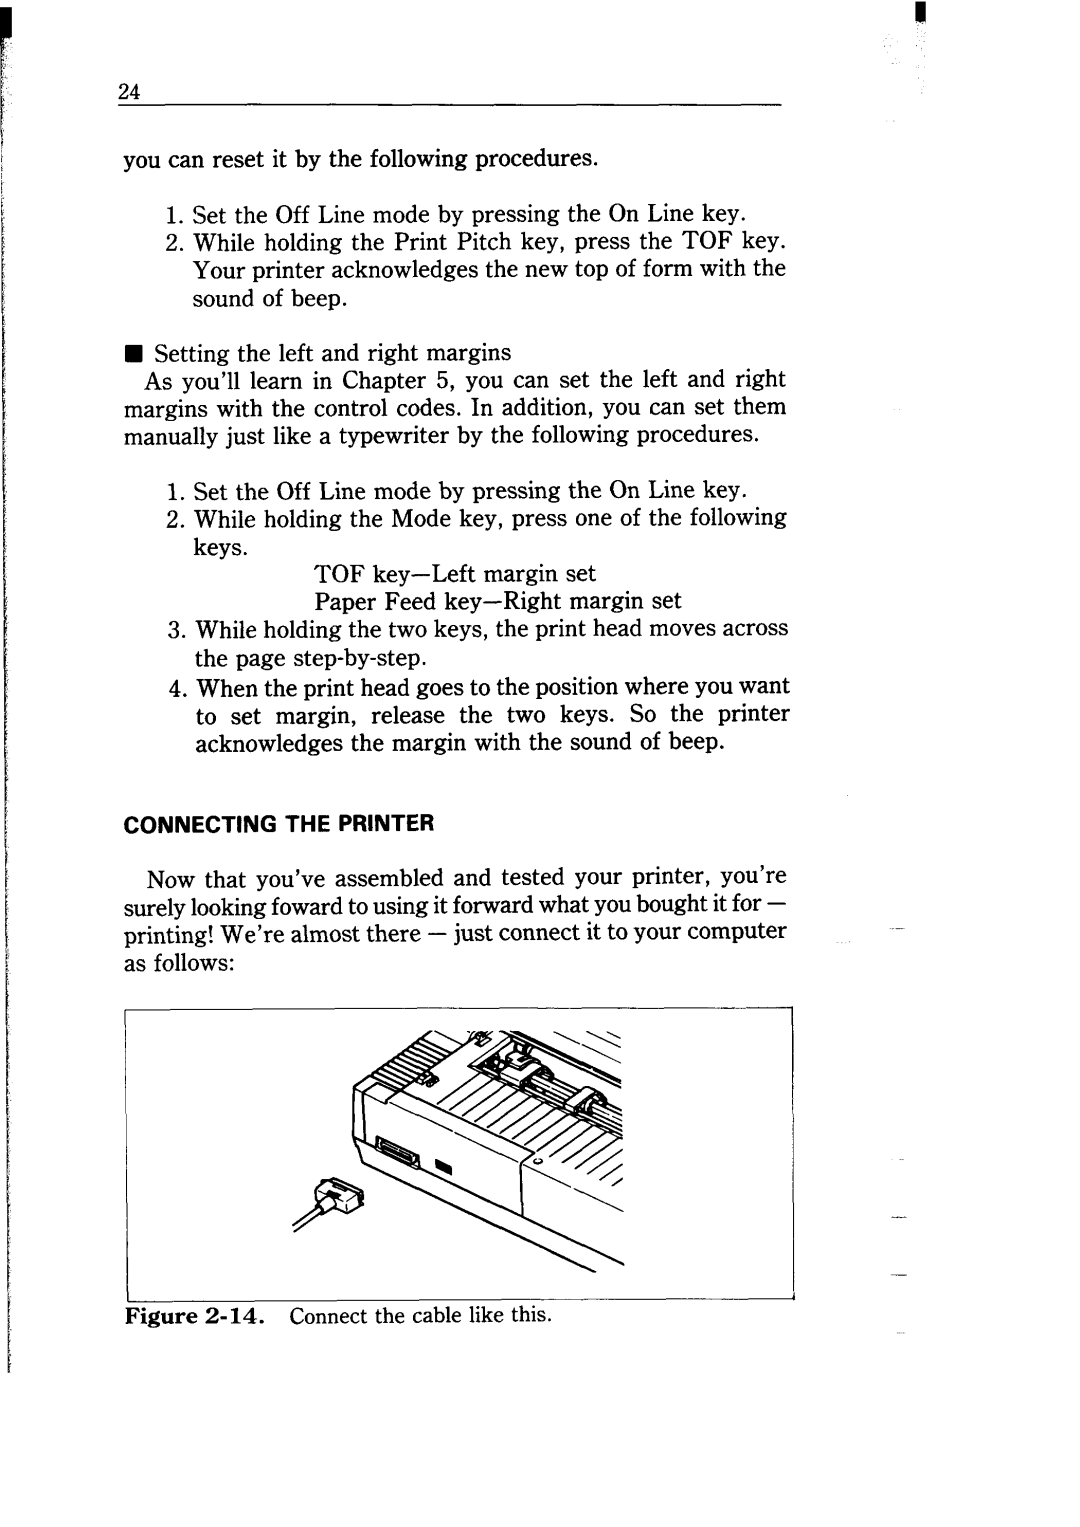 Star Micronics NB-15 user manual Connecting The Printer, 14. Connect the cable like thm 